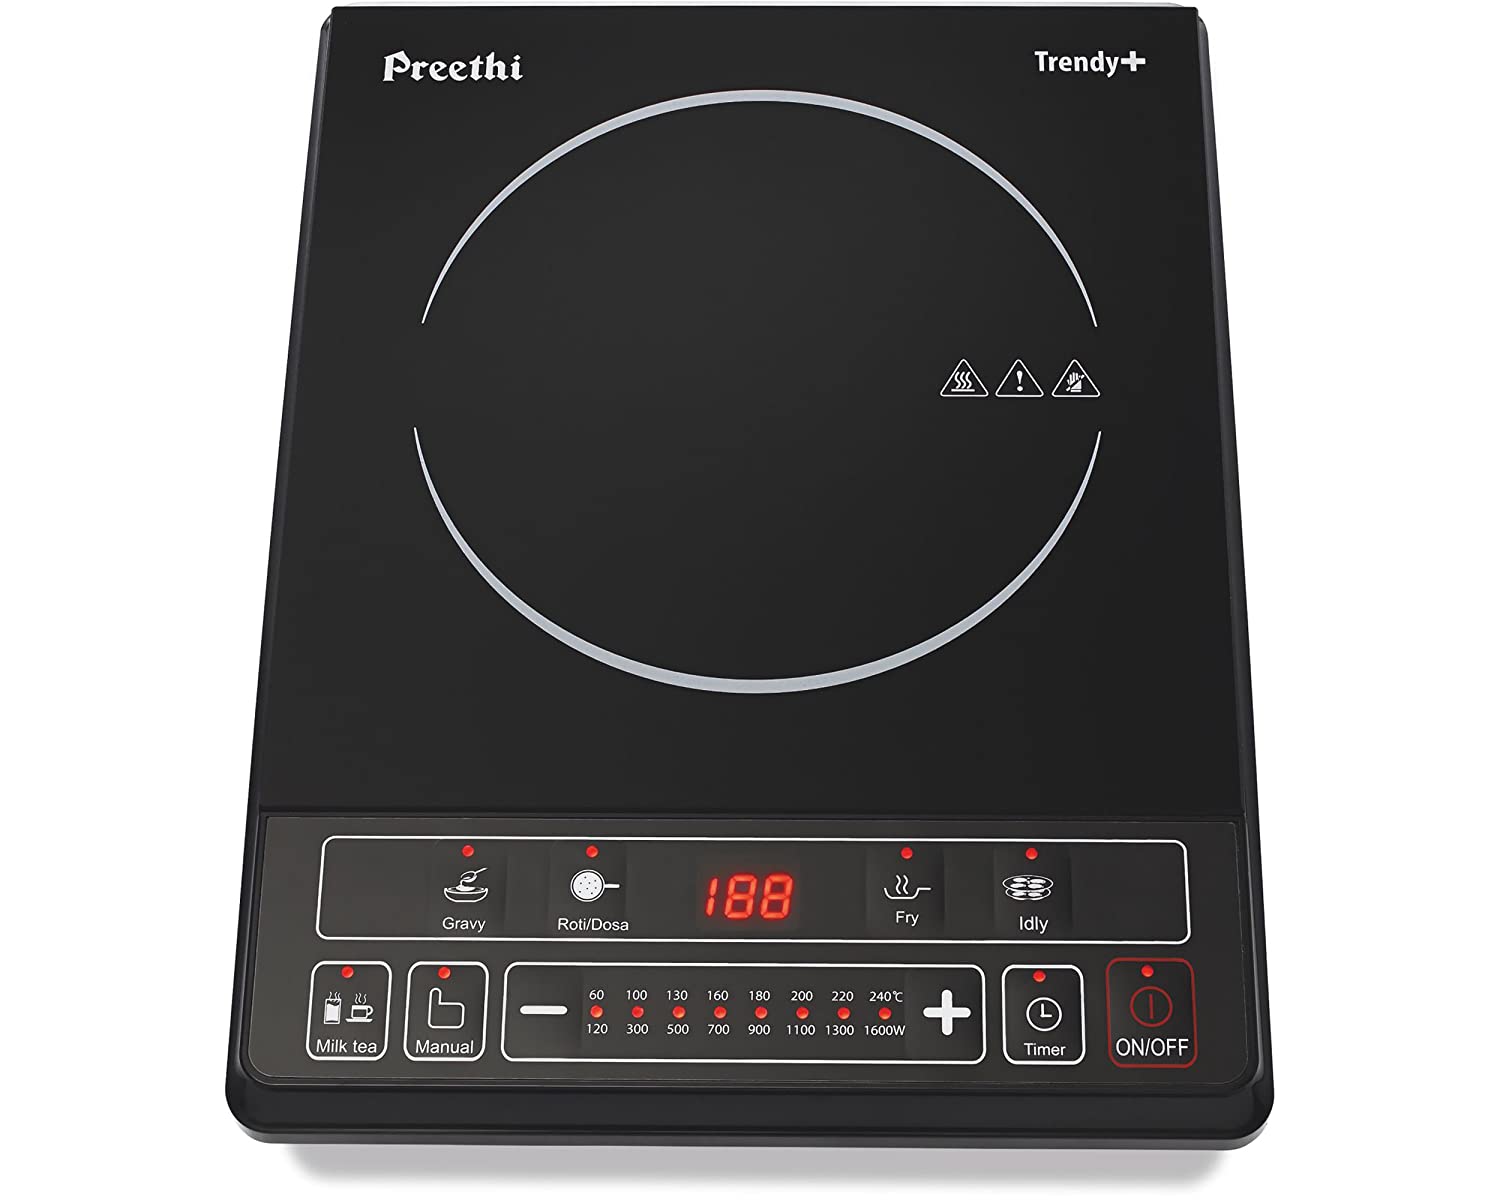 PREETHI INDUCTION COOKTOP TRENDY PLUS